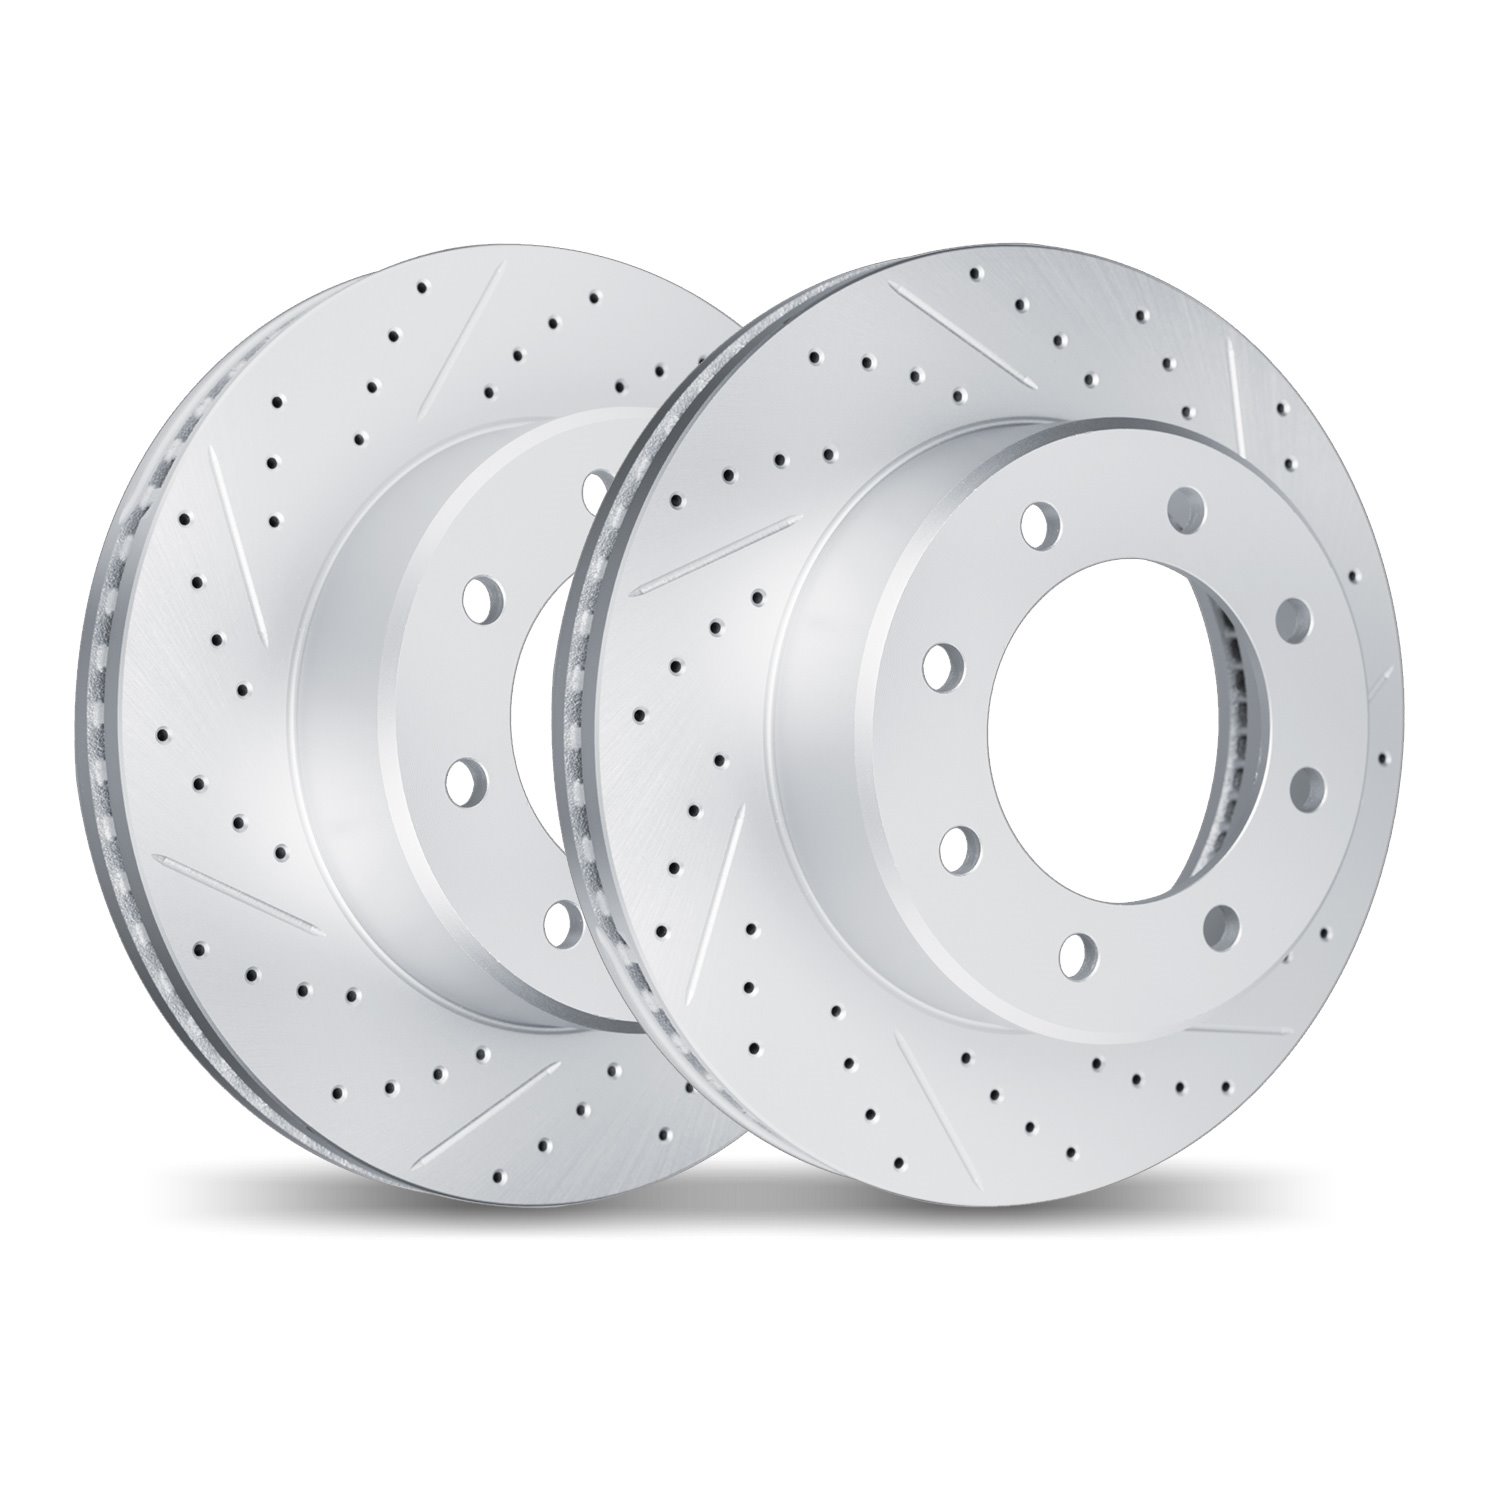 2002-54069 Geoperformance Drilled/Slotted Brake Rotors, 2005-2007 Ford/Lincoln/Mercury/Mazda, Position: Front